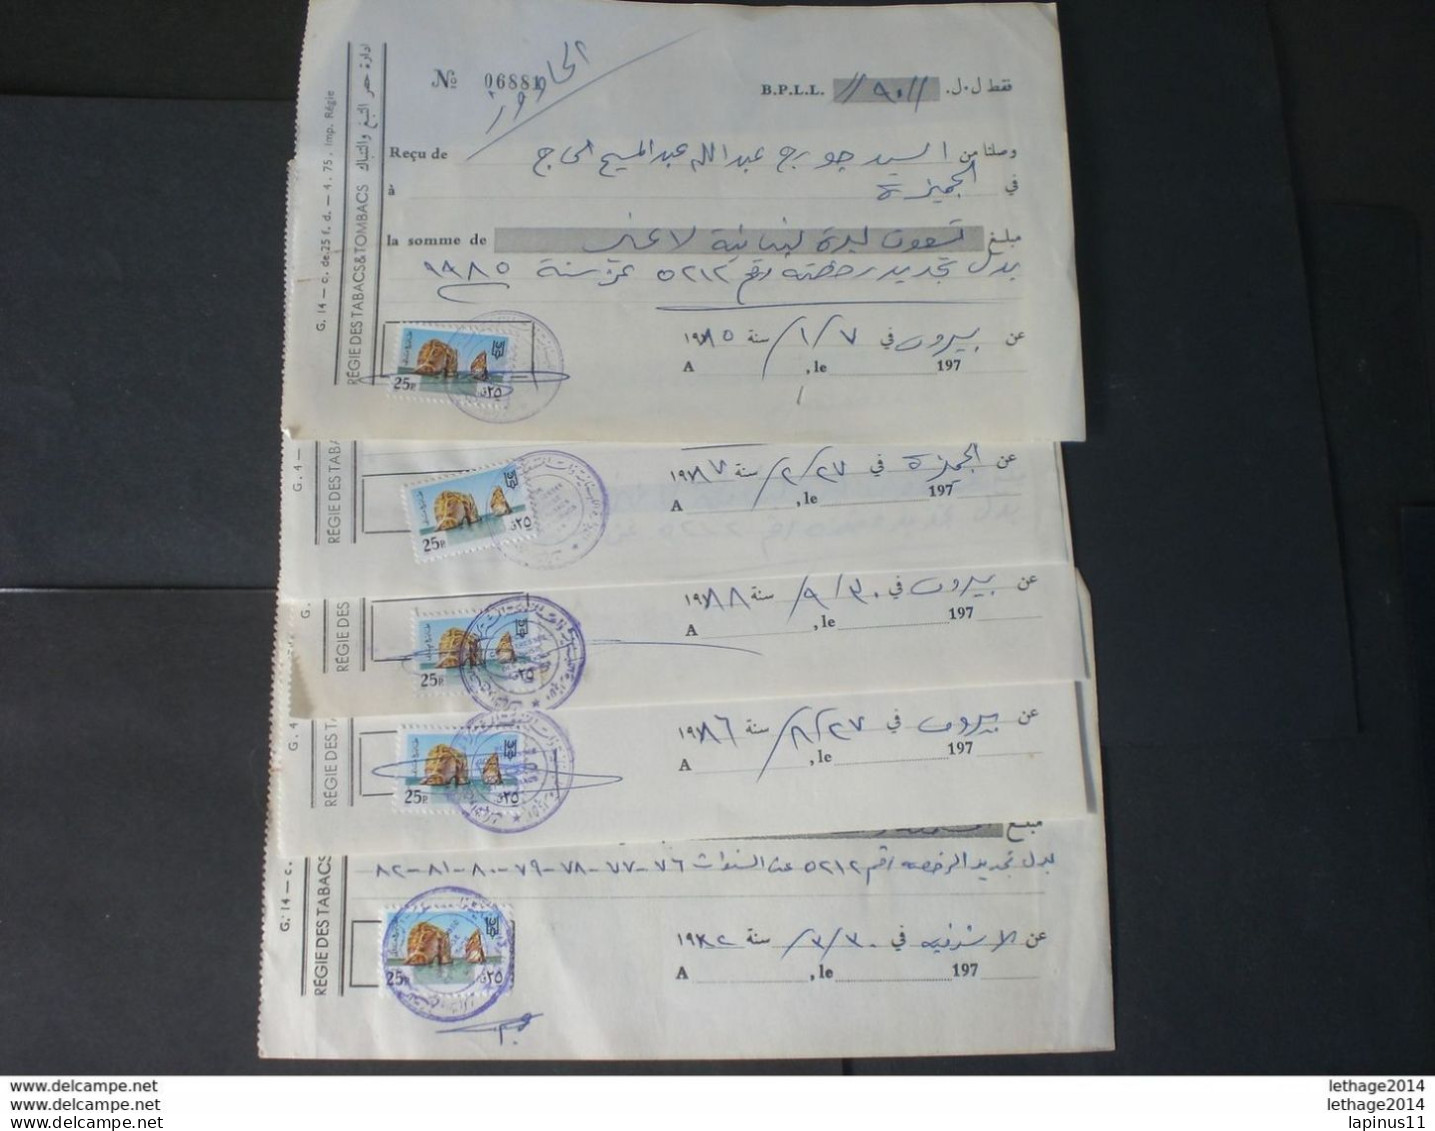 LEBANON لبنان GRAND LIBAN STAMPS TAXE TAX FISCAL REVENUE ORIGINAL NUMBER 88 DOCUMENT + 7 PHOTO - Liban